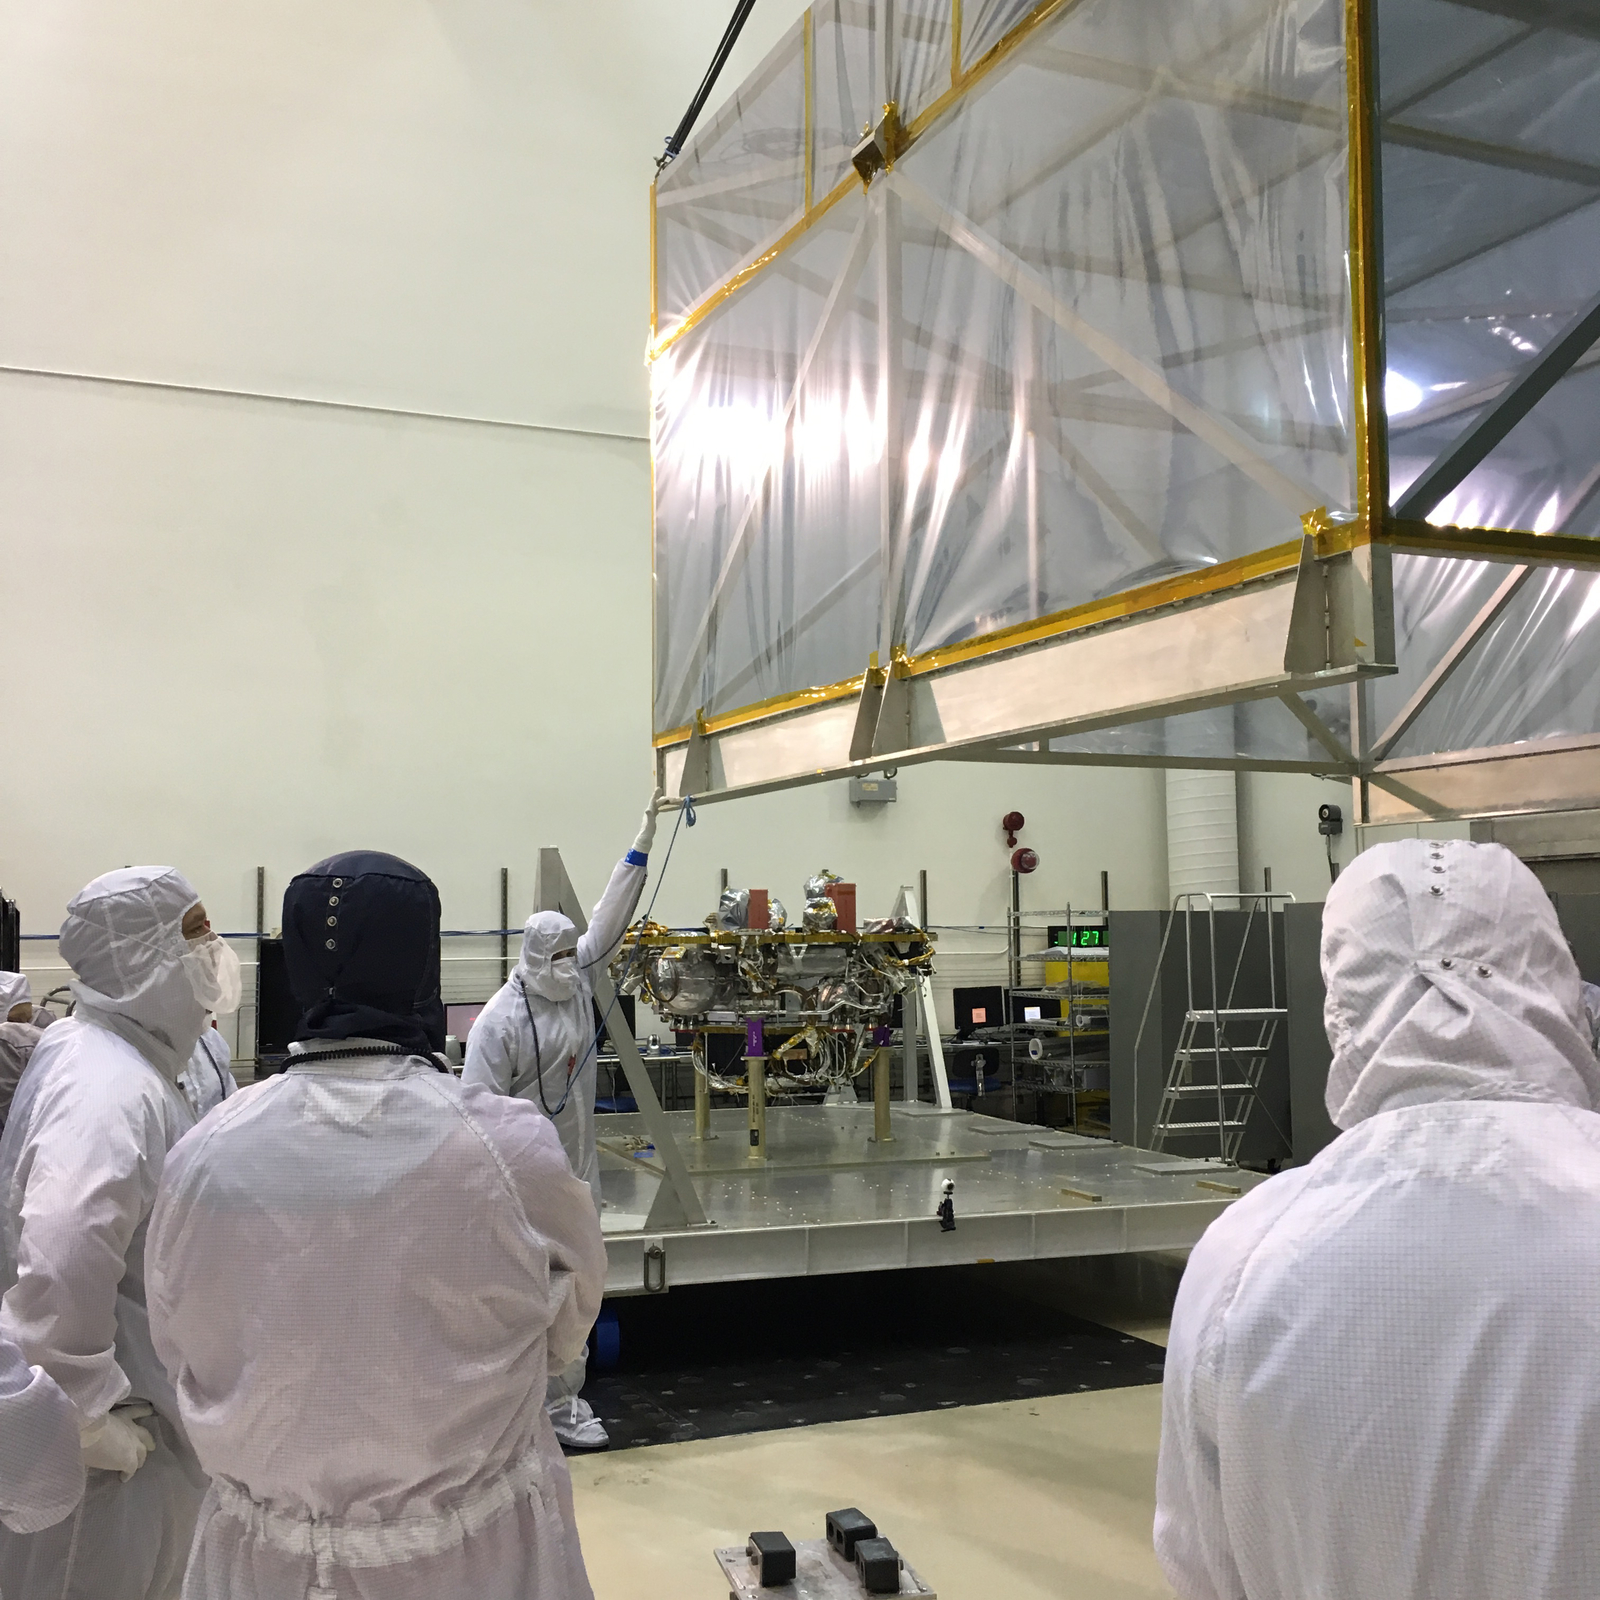 In a Lockheed Martin clean room facility near Denver in June 2017, members of the InSight mission's assembly, test and launch operations team remove the inner layer of protective housing that covered NASA's InSight spacecraft while the spacecraft was in storage after a launch postponement.